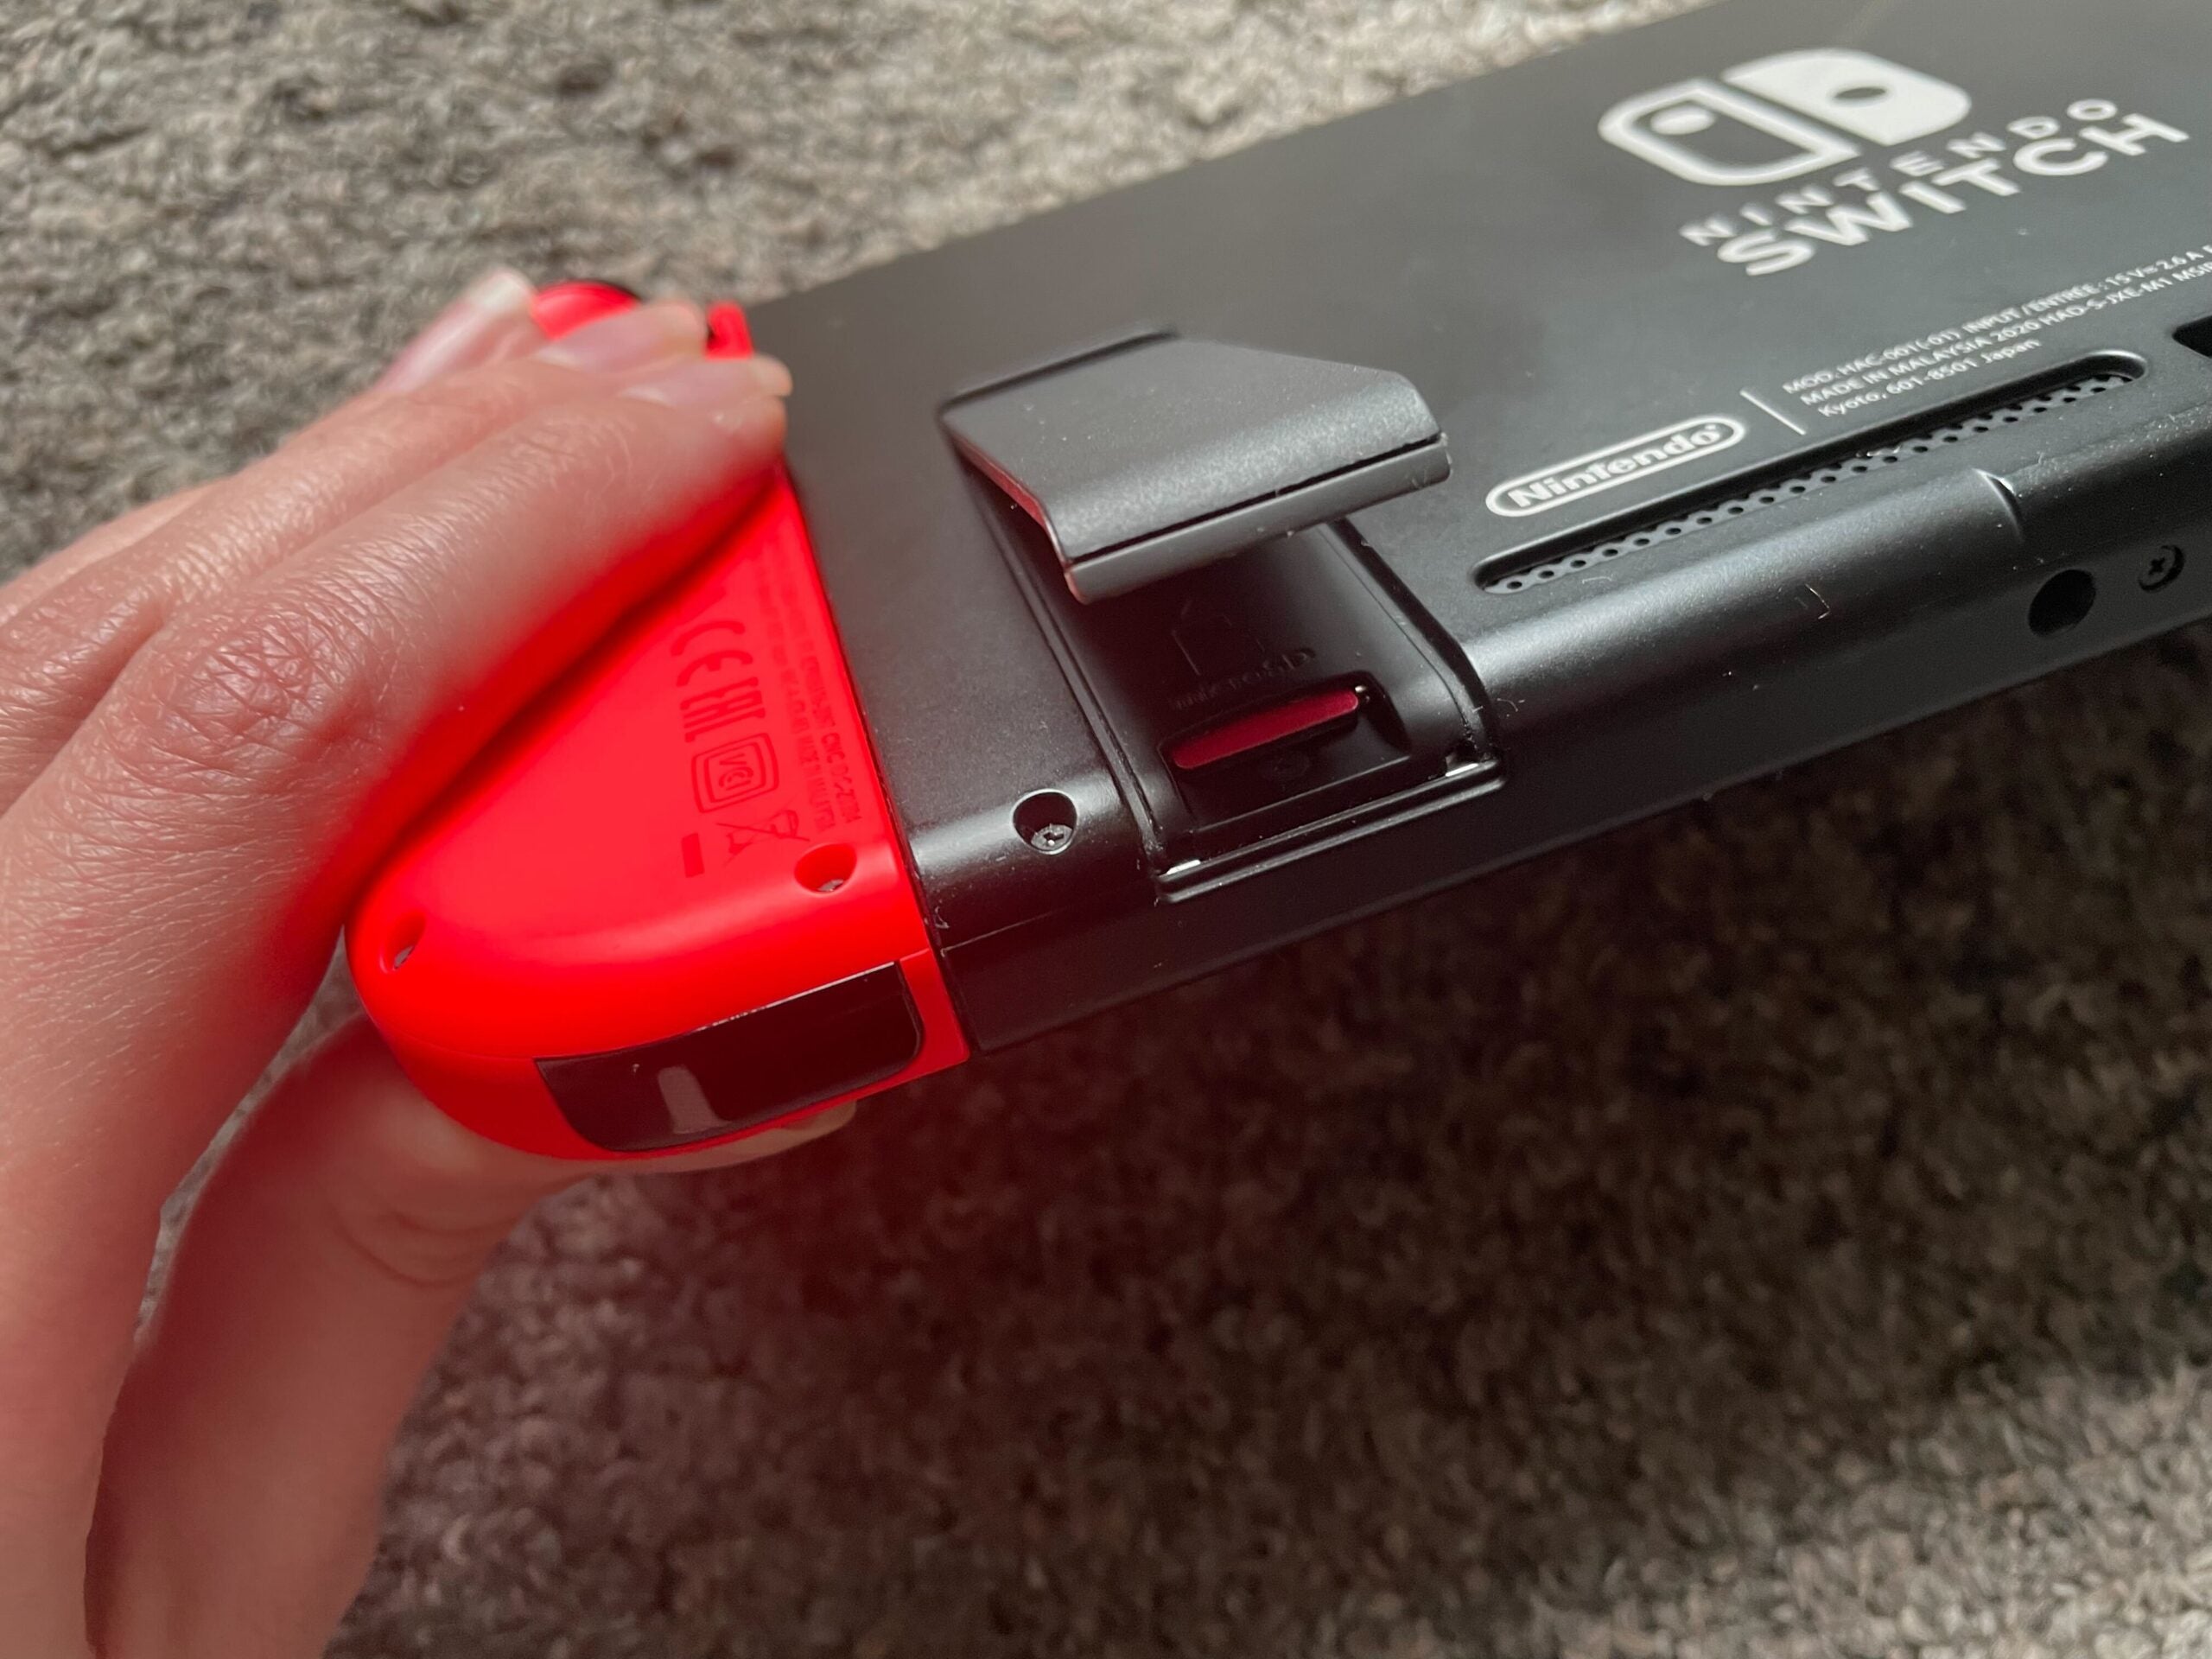 SD card fully inserted into the Switch